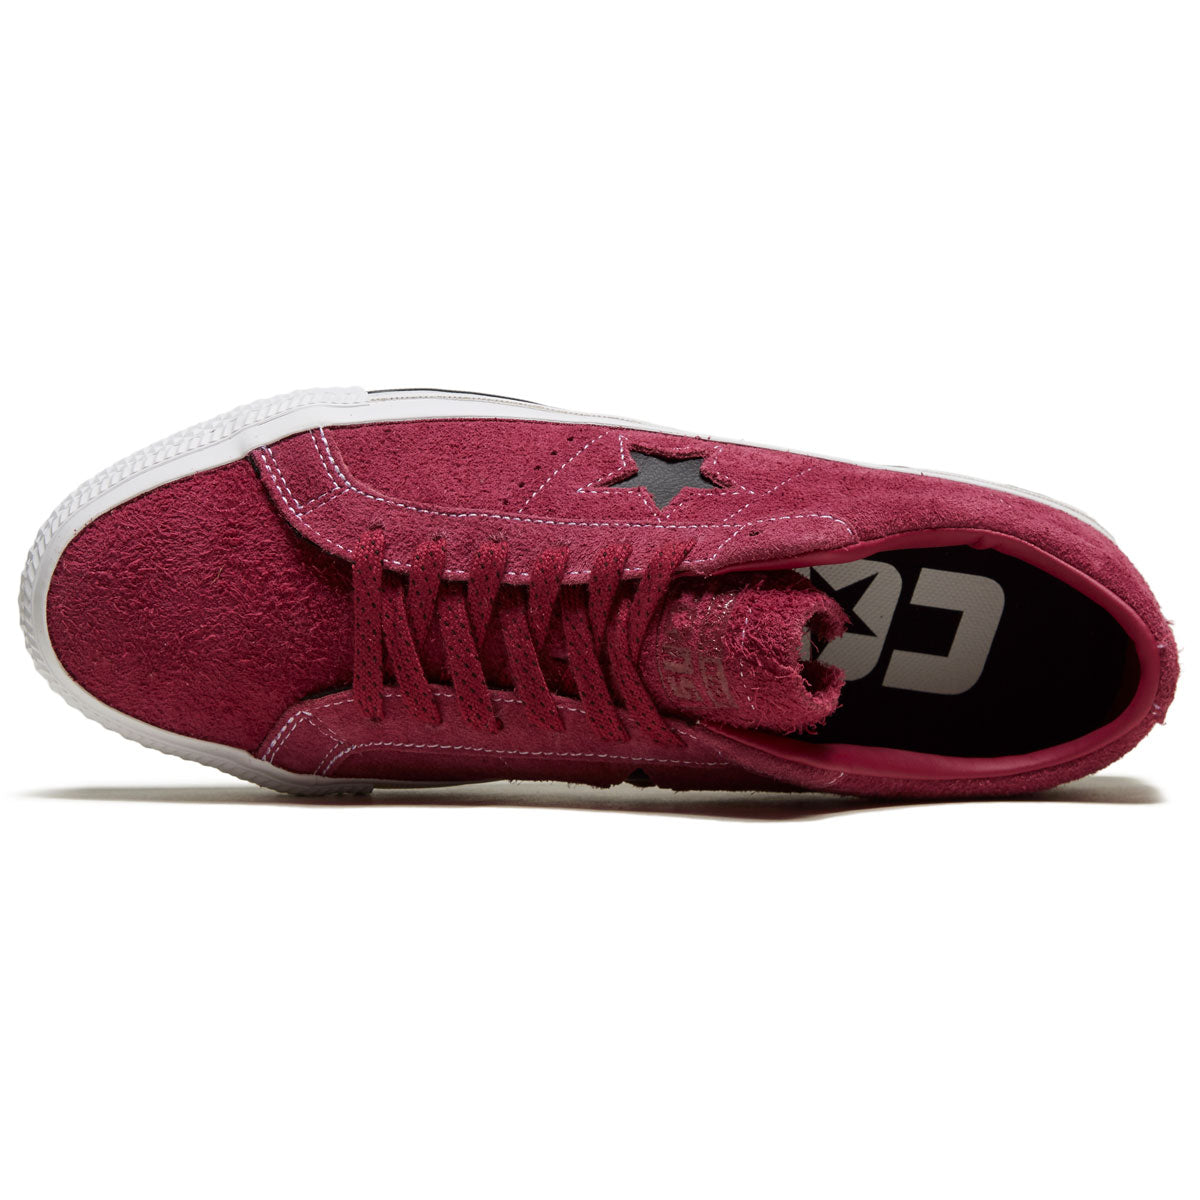 Converse One Star Pro Ox Shoes - Legend Berry/White/Black image 3